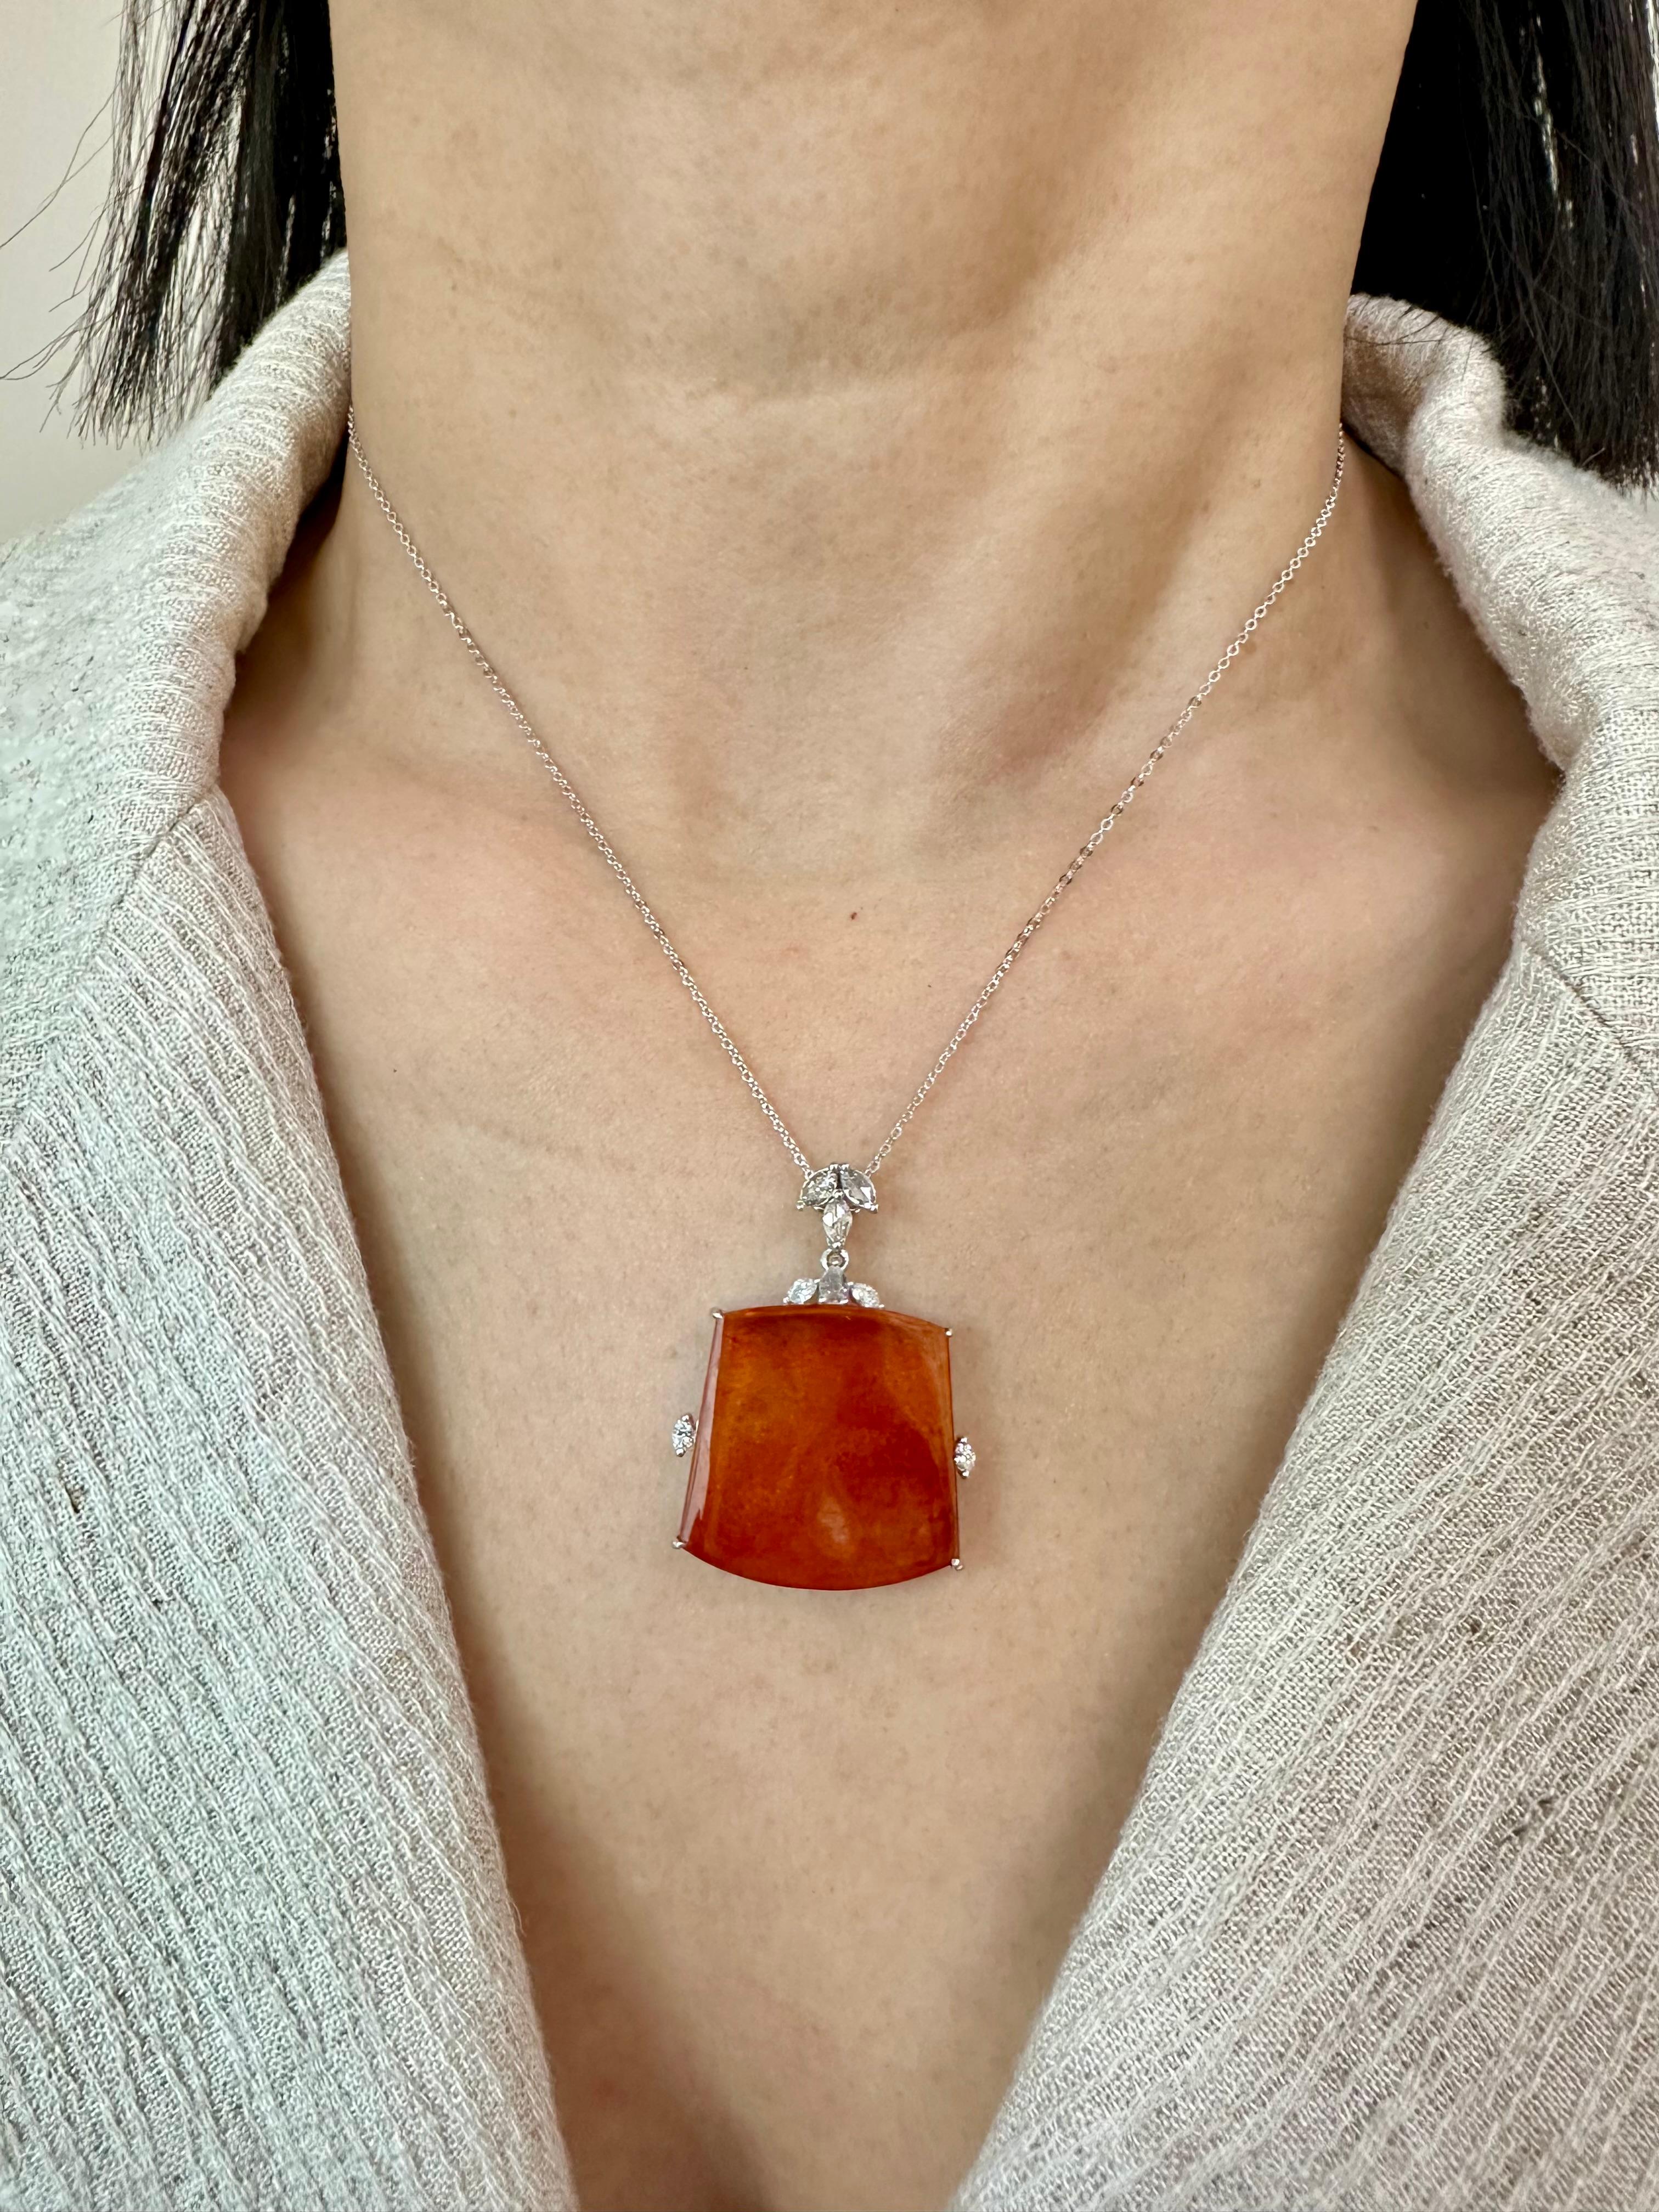 Please check out the HD video! This oversized pendant is amazing and it GLOWS. It is equally good looking from the front as it is from the back. The 